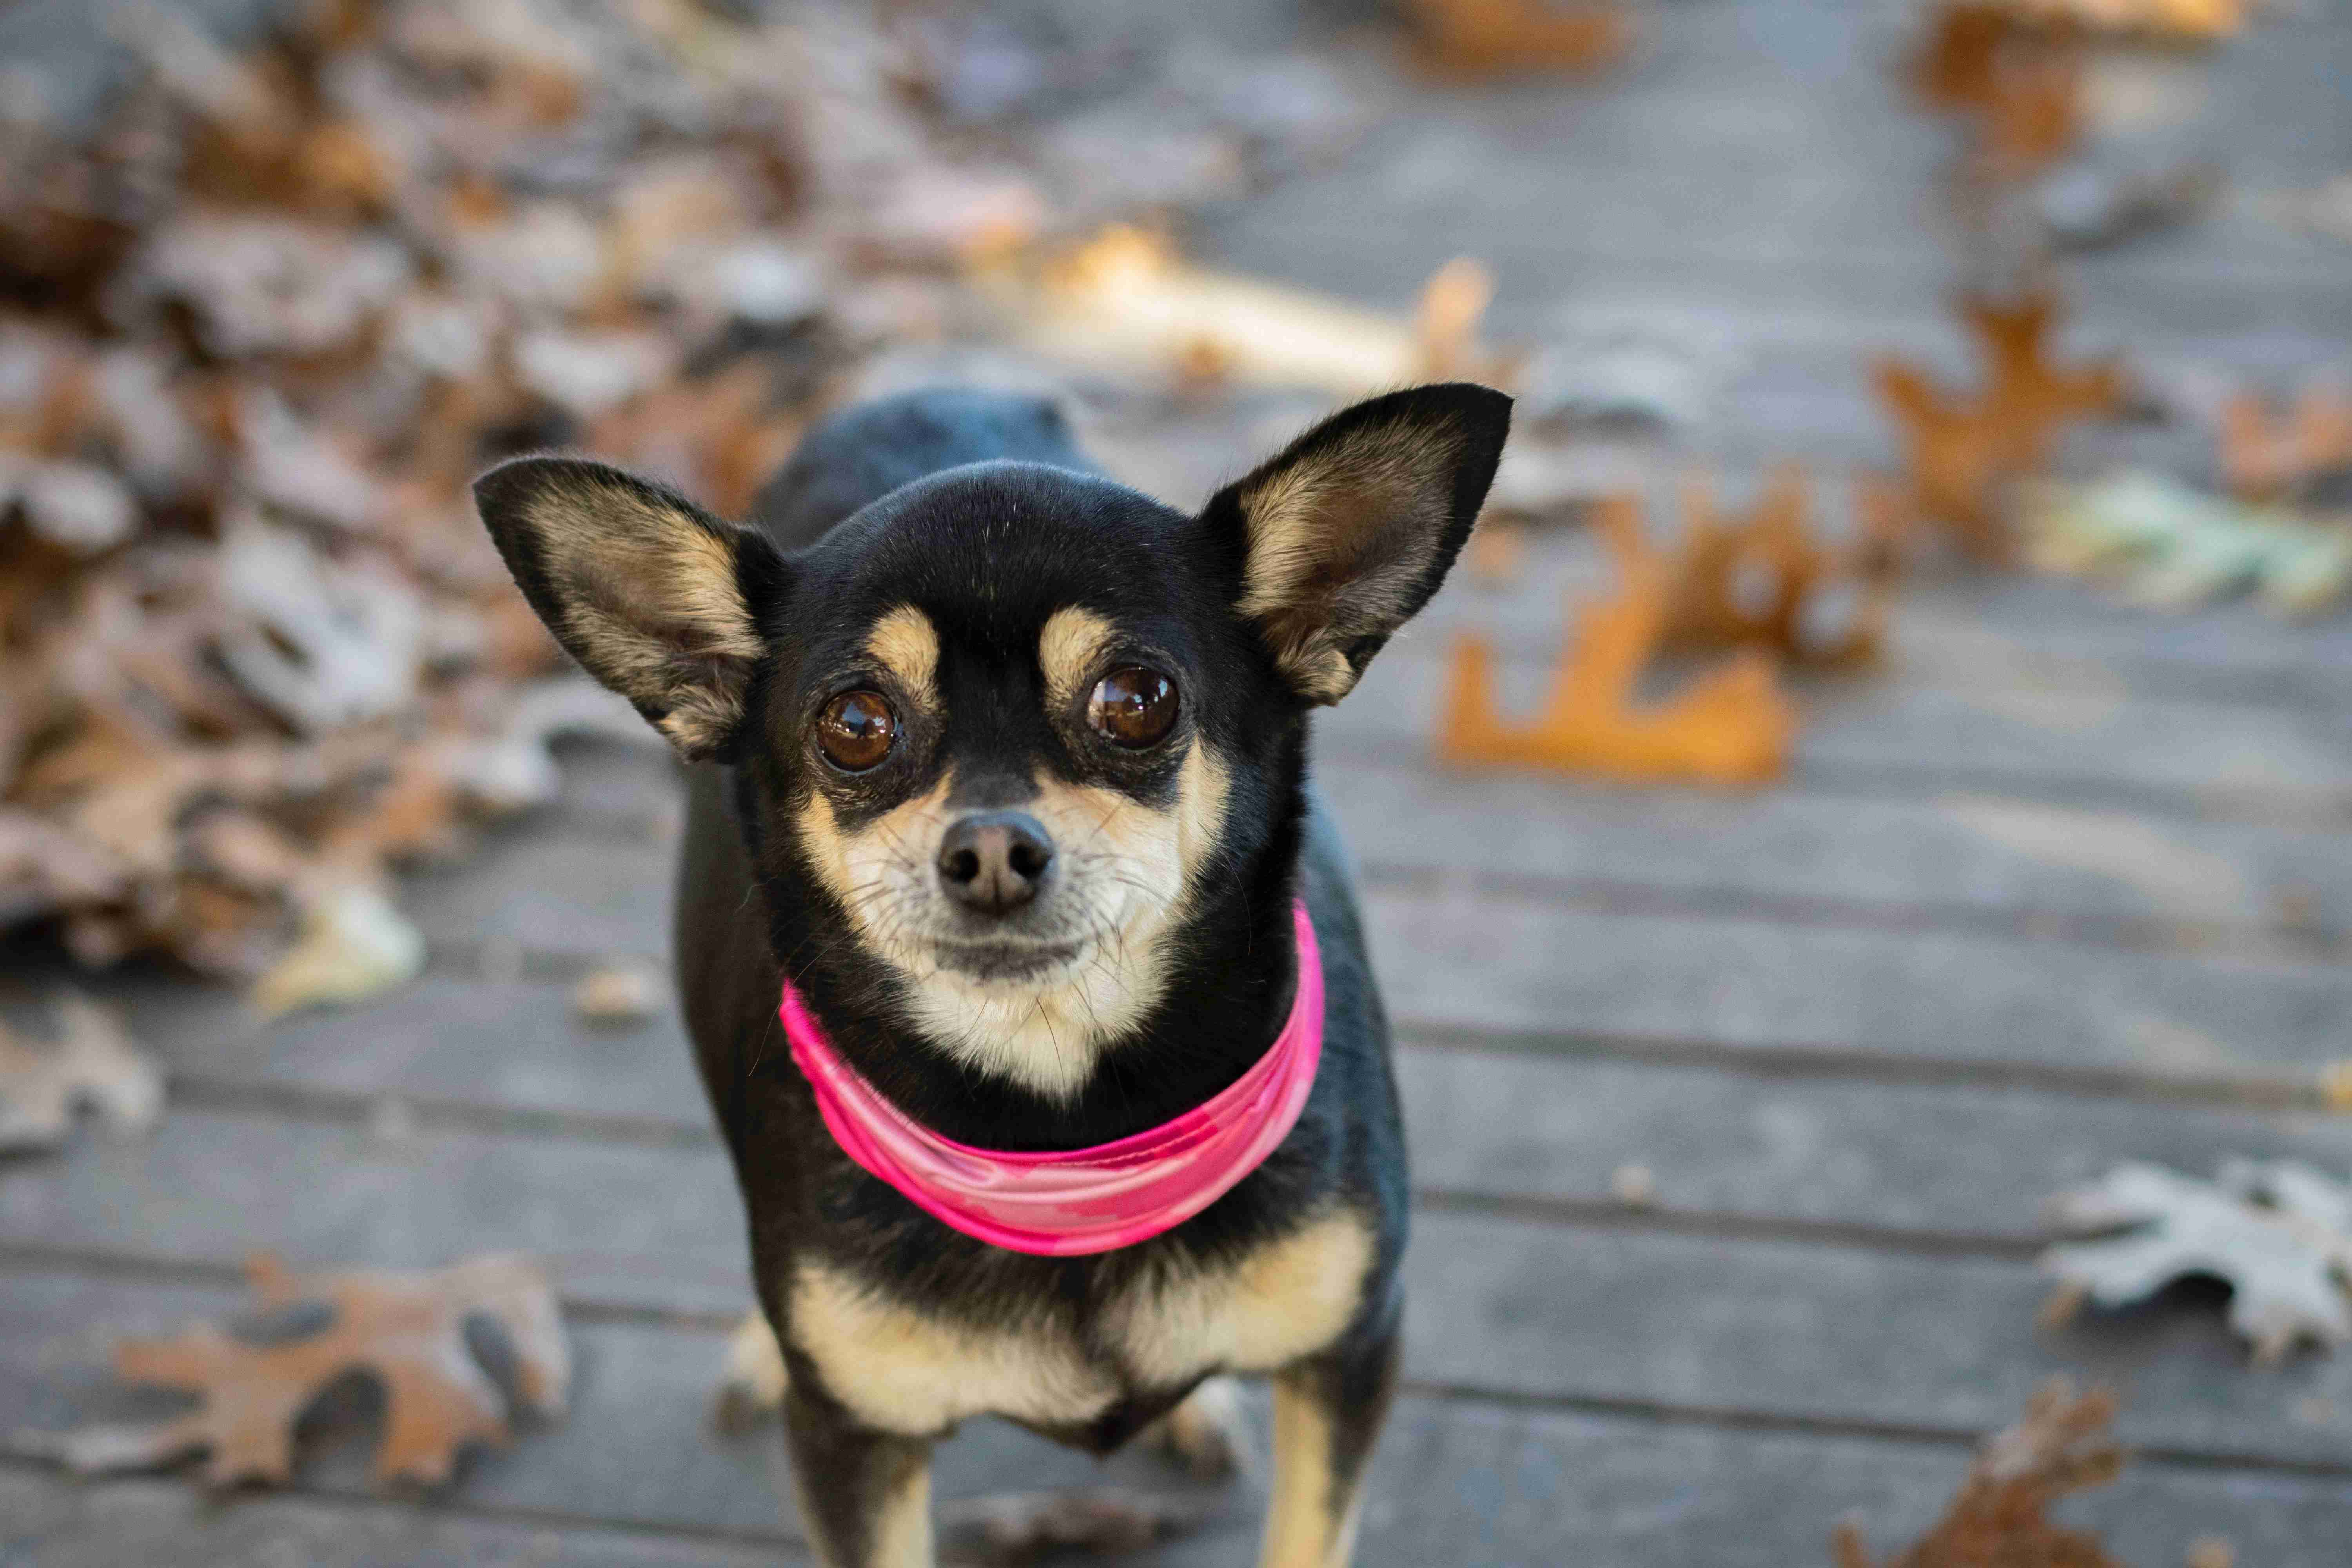 How can you establish yourself as a calm and assertive leader for a Chihuahua with anger issues?